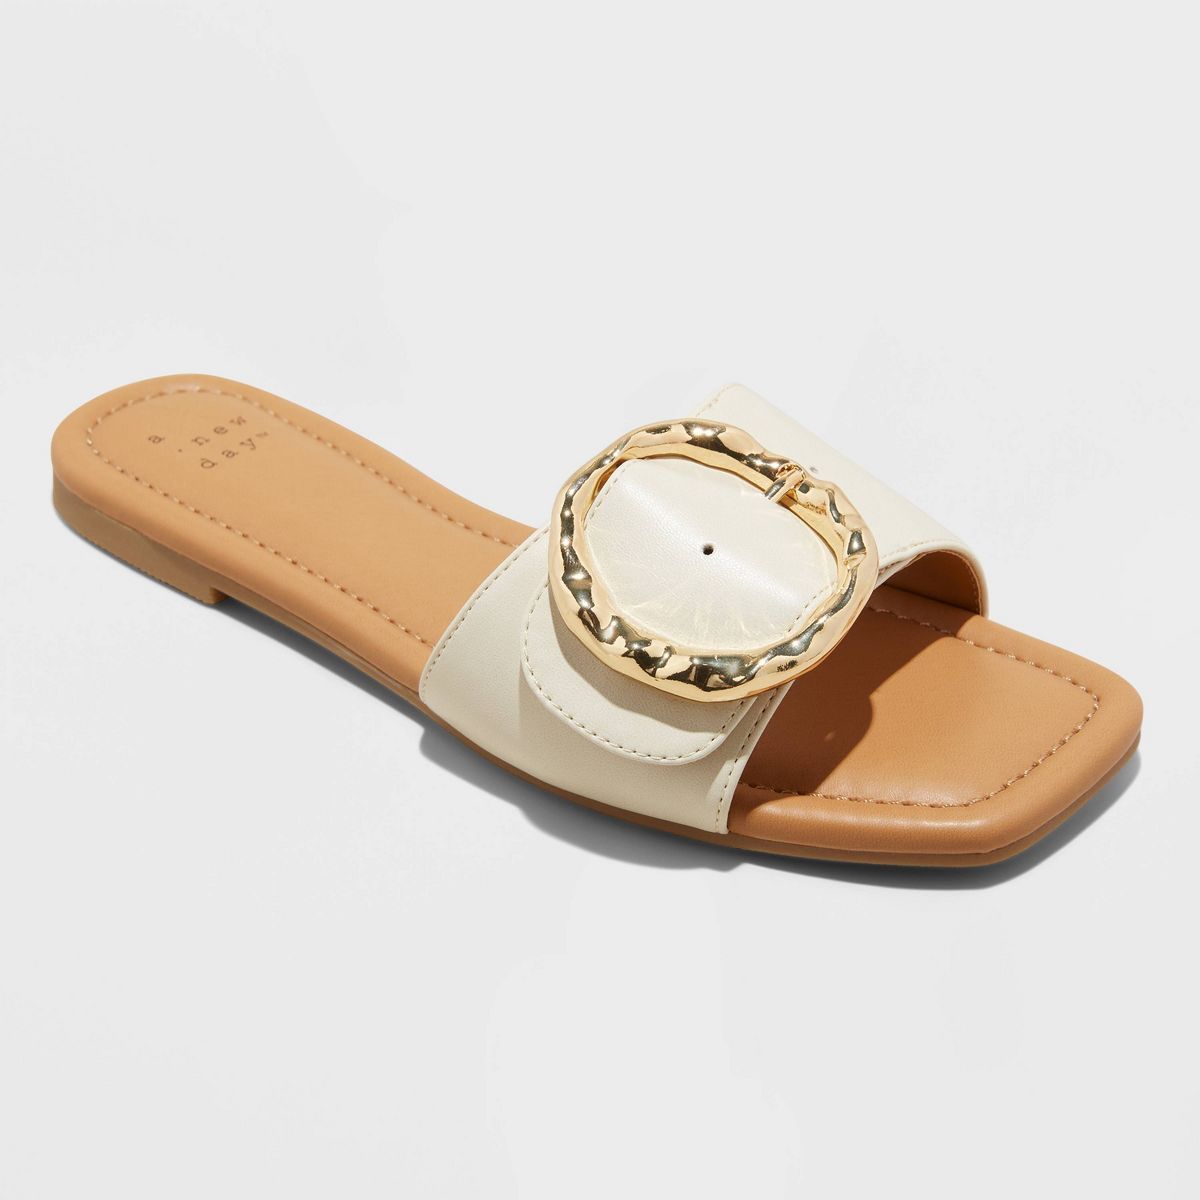 Women's Bennie Buckle Slide Sandals with Memory Foam Insole - A New Day™ Cream 7.5 | Target